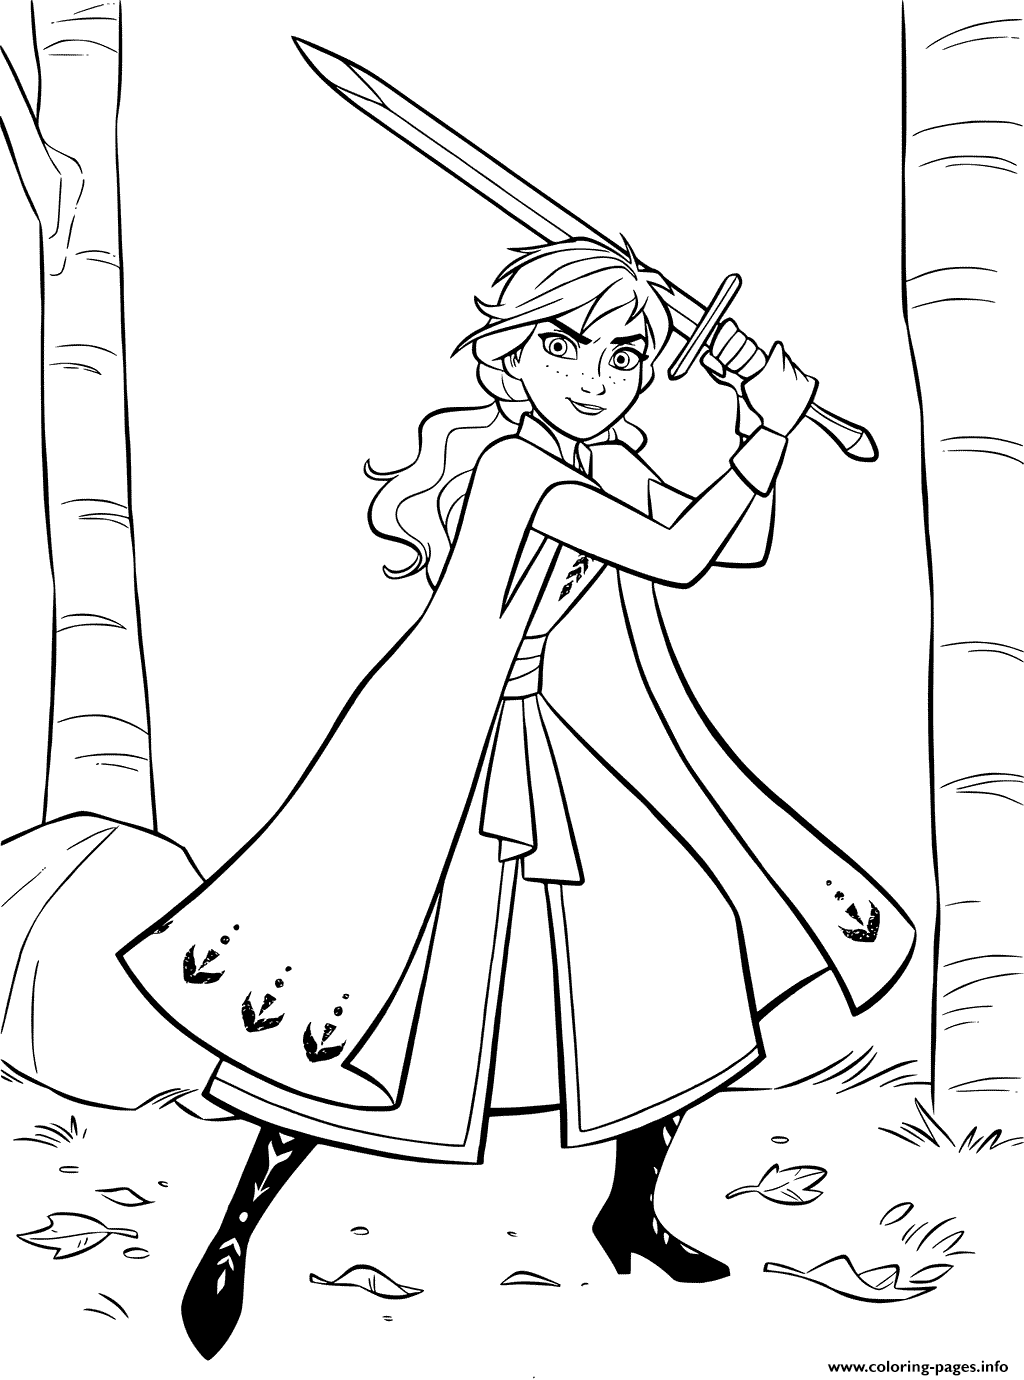 Anna With Sword Coloring page Printable